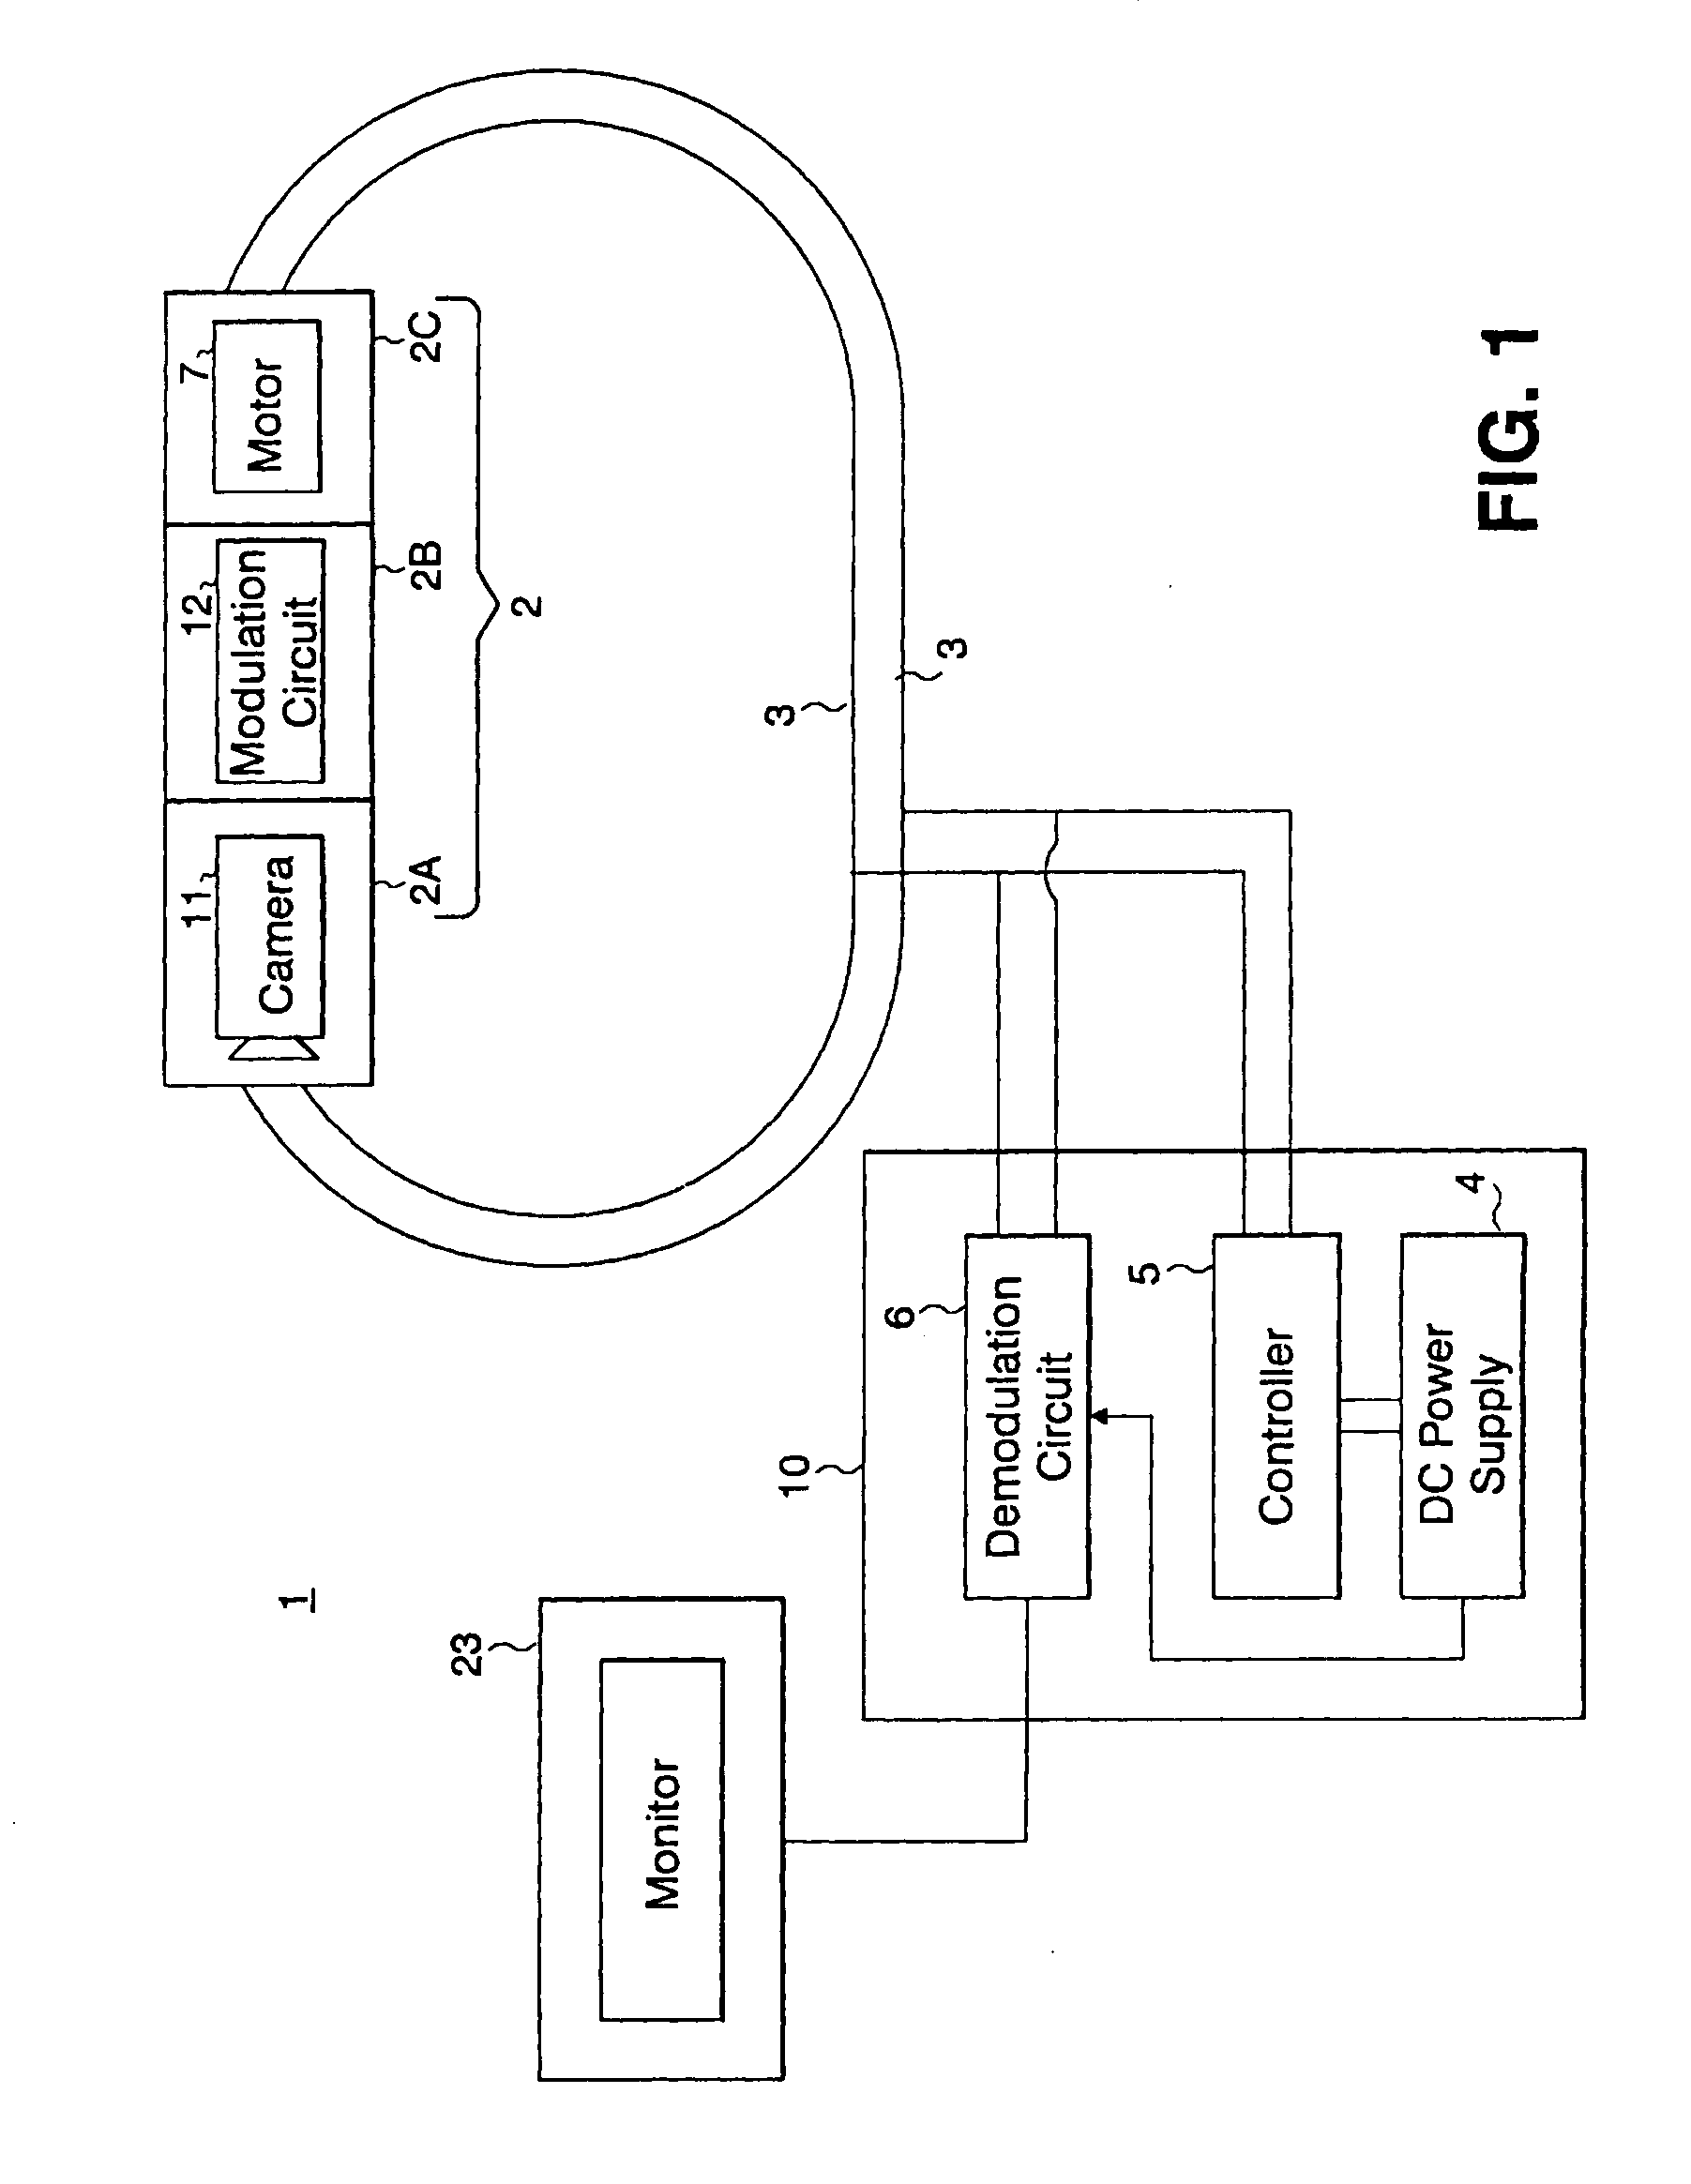 Apparatus for projecting image from a model vehicle